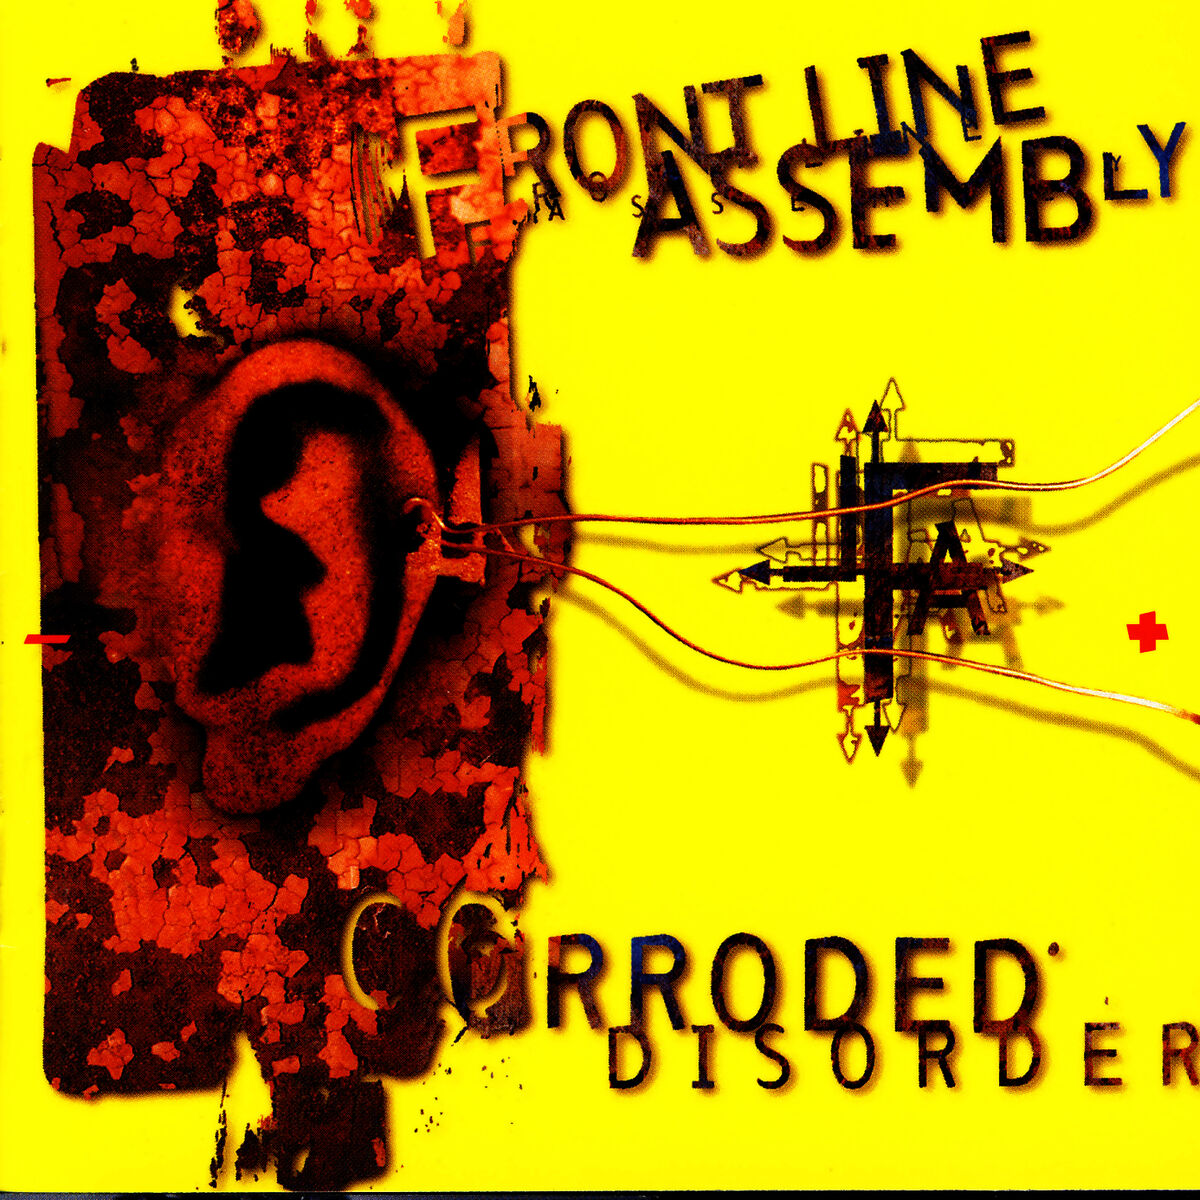 Front Line Assembly: albums, songs, playlists | Listen on Deezer